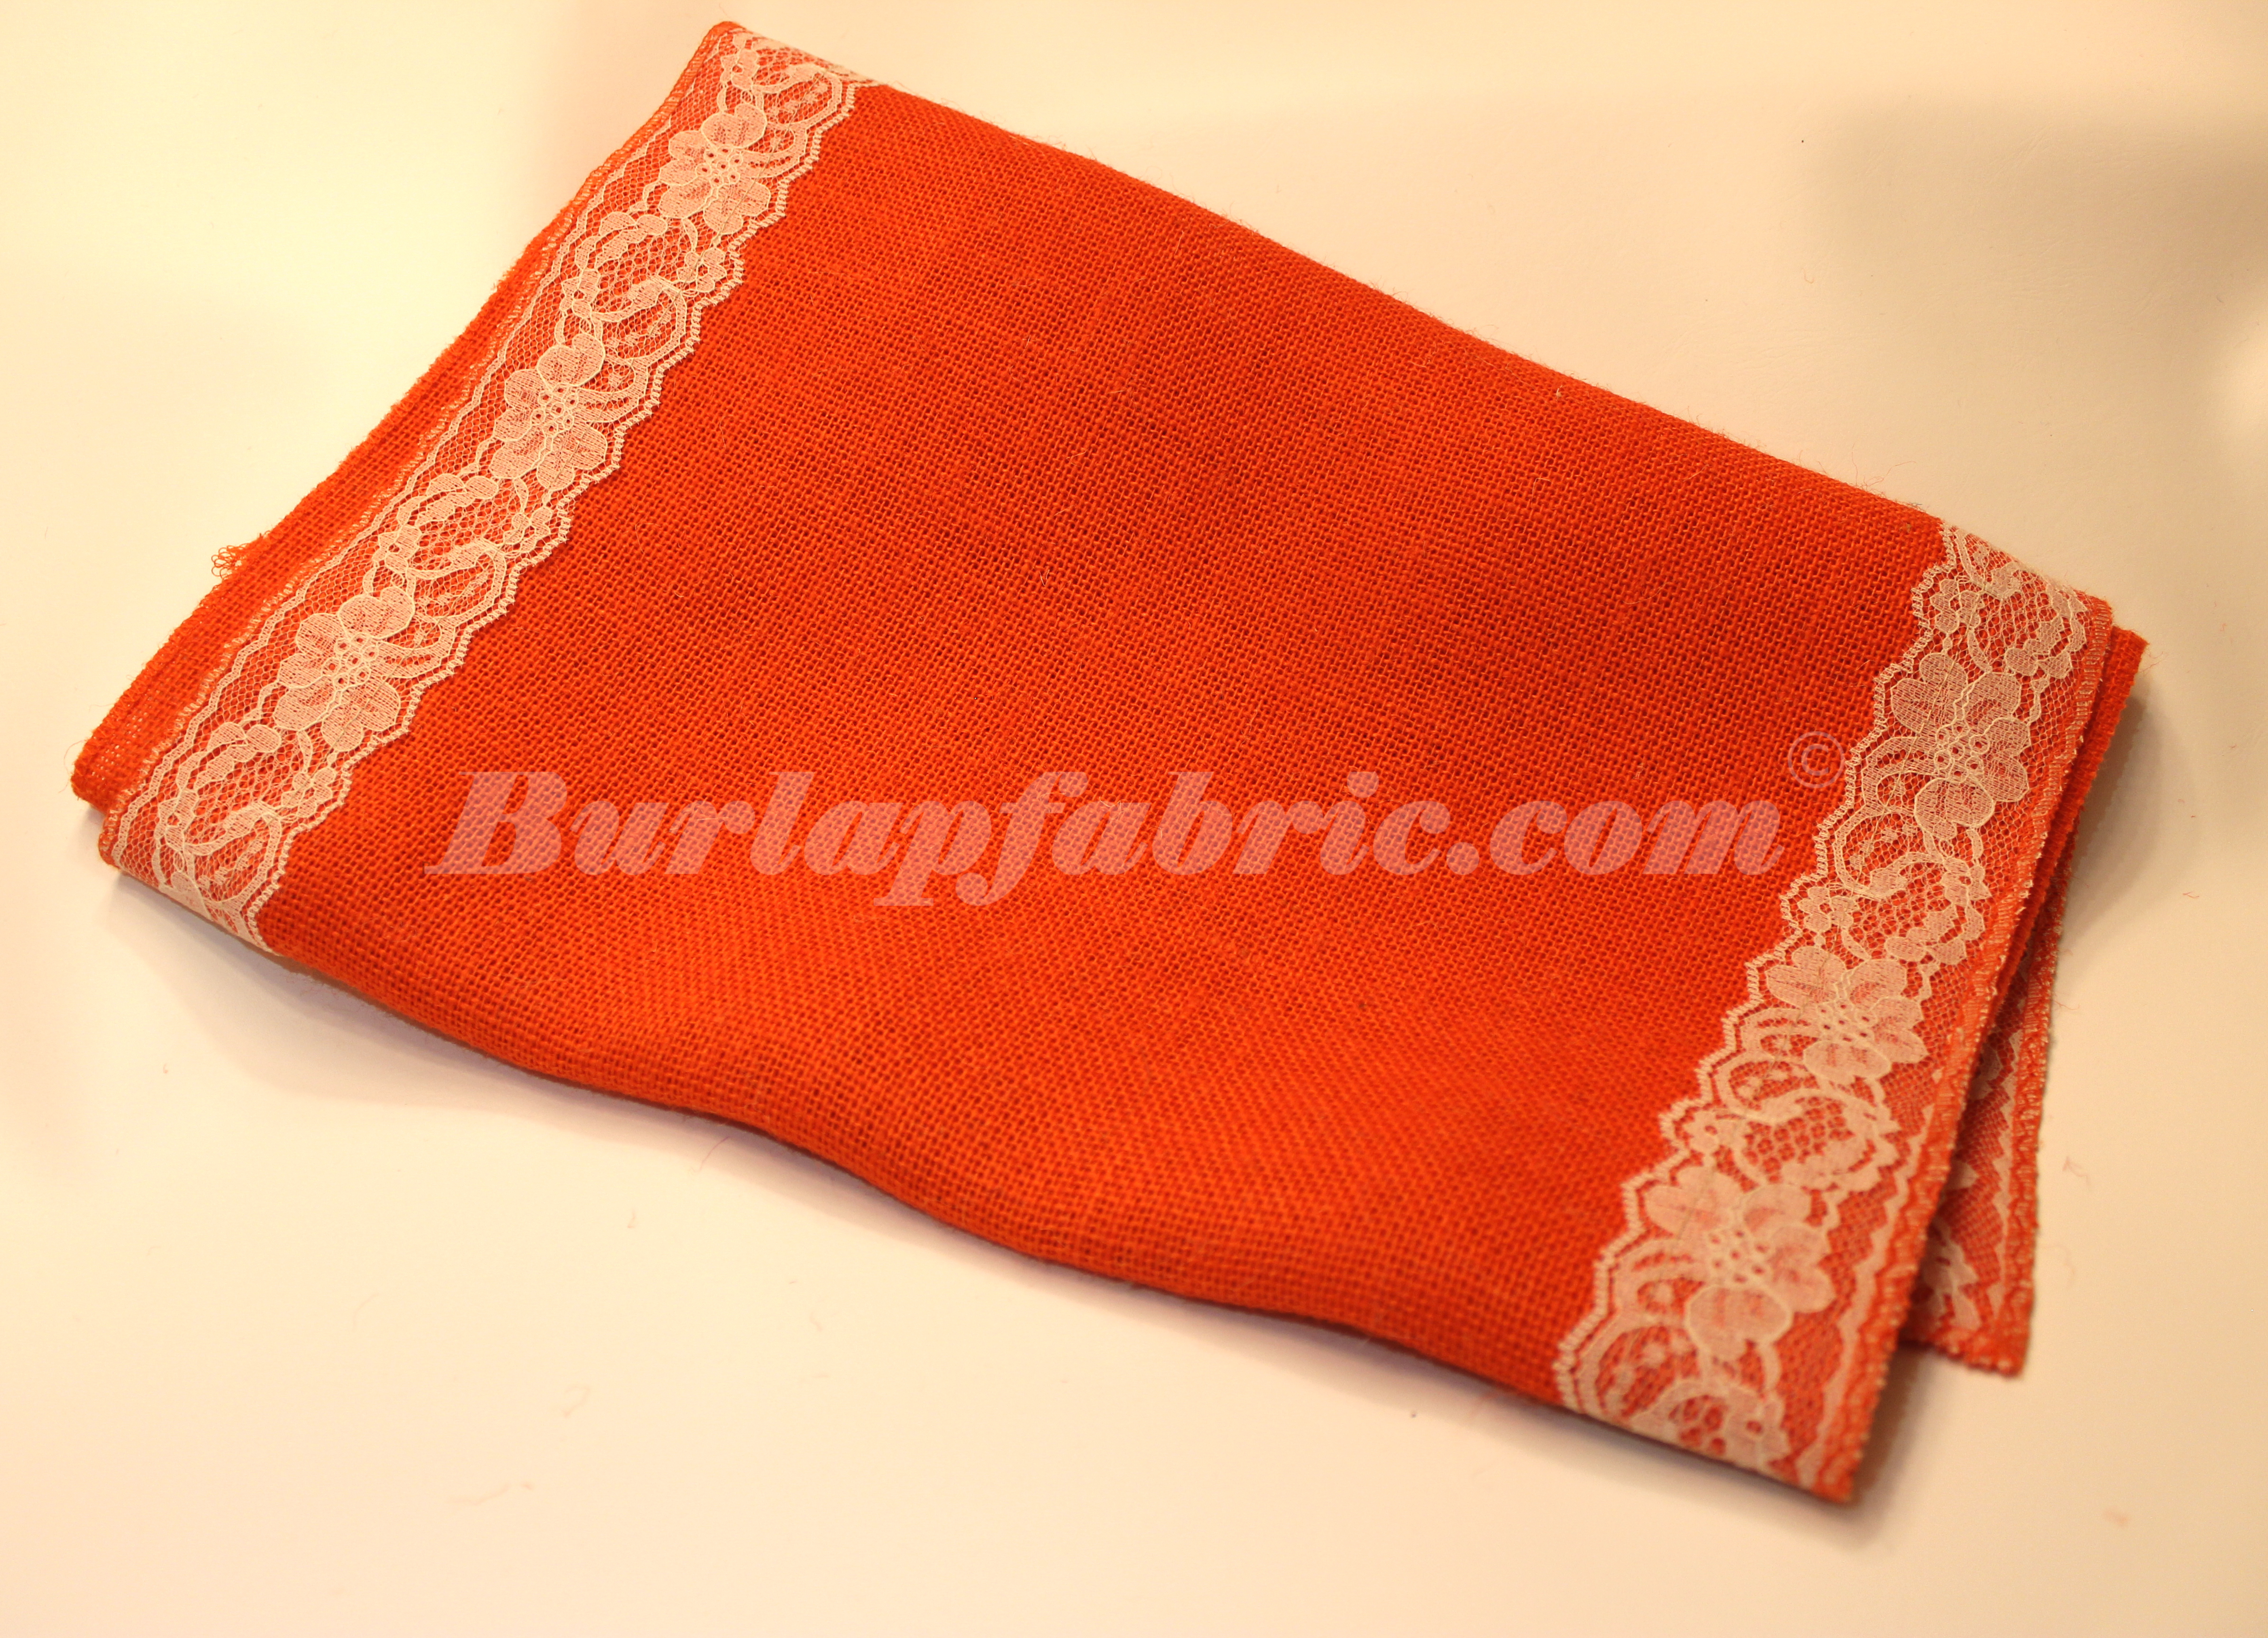 14" Tangerine Burlap Runner with 2" Ivory Lace Borders